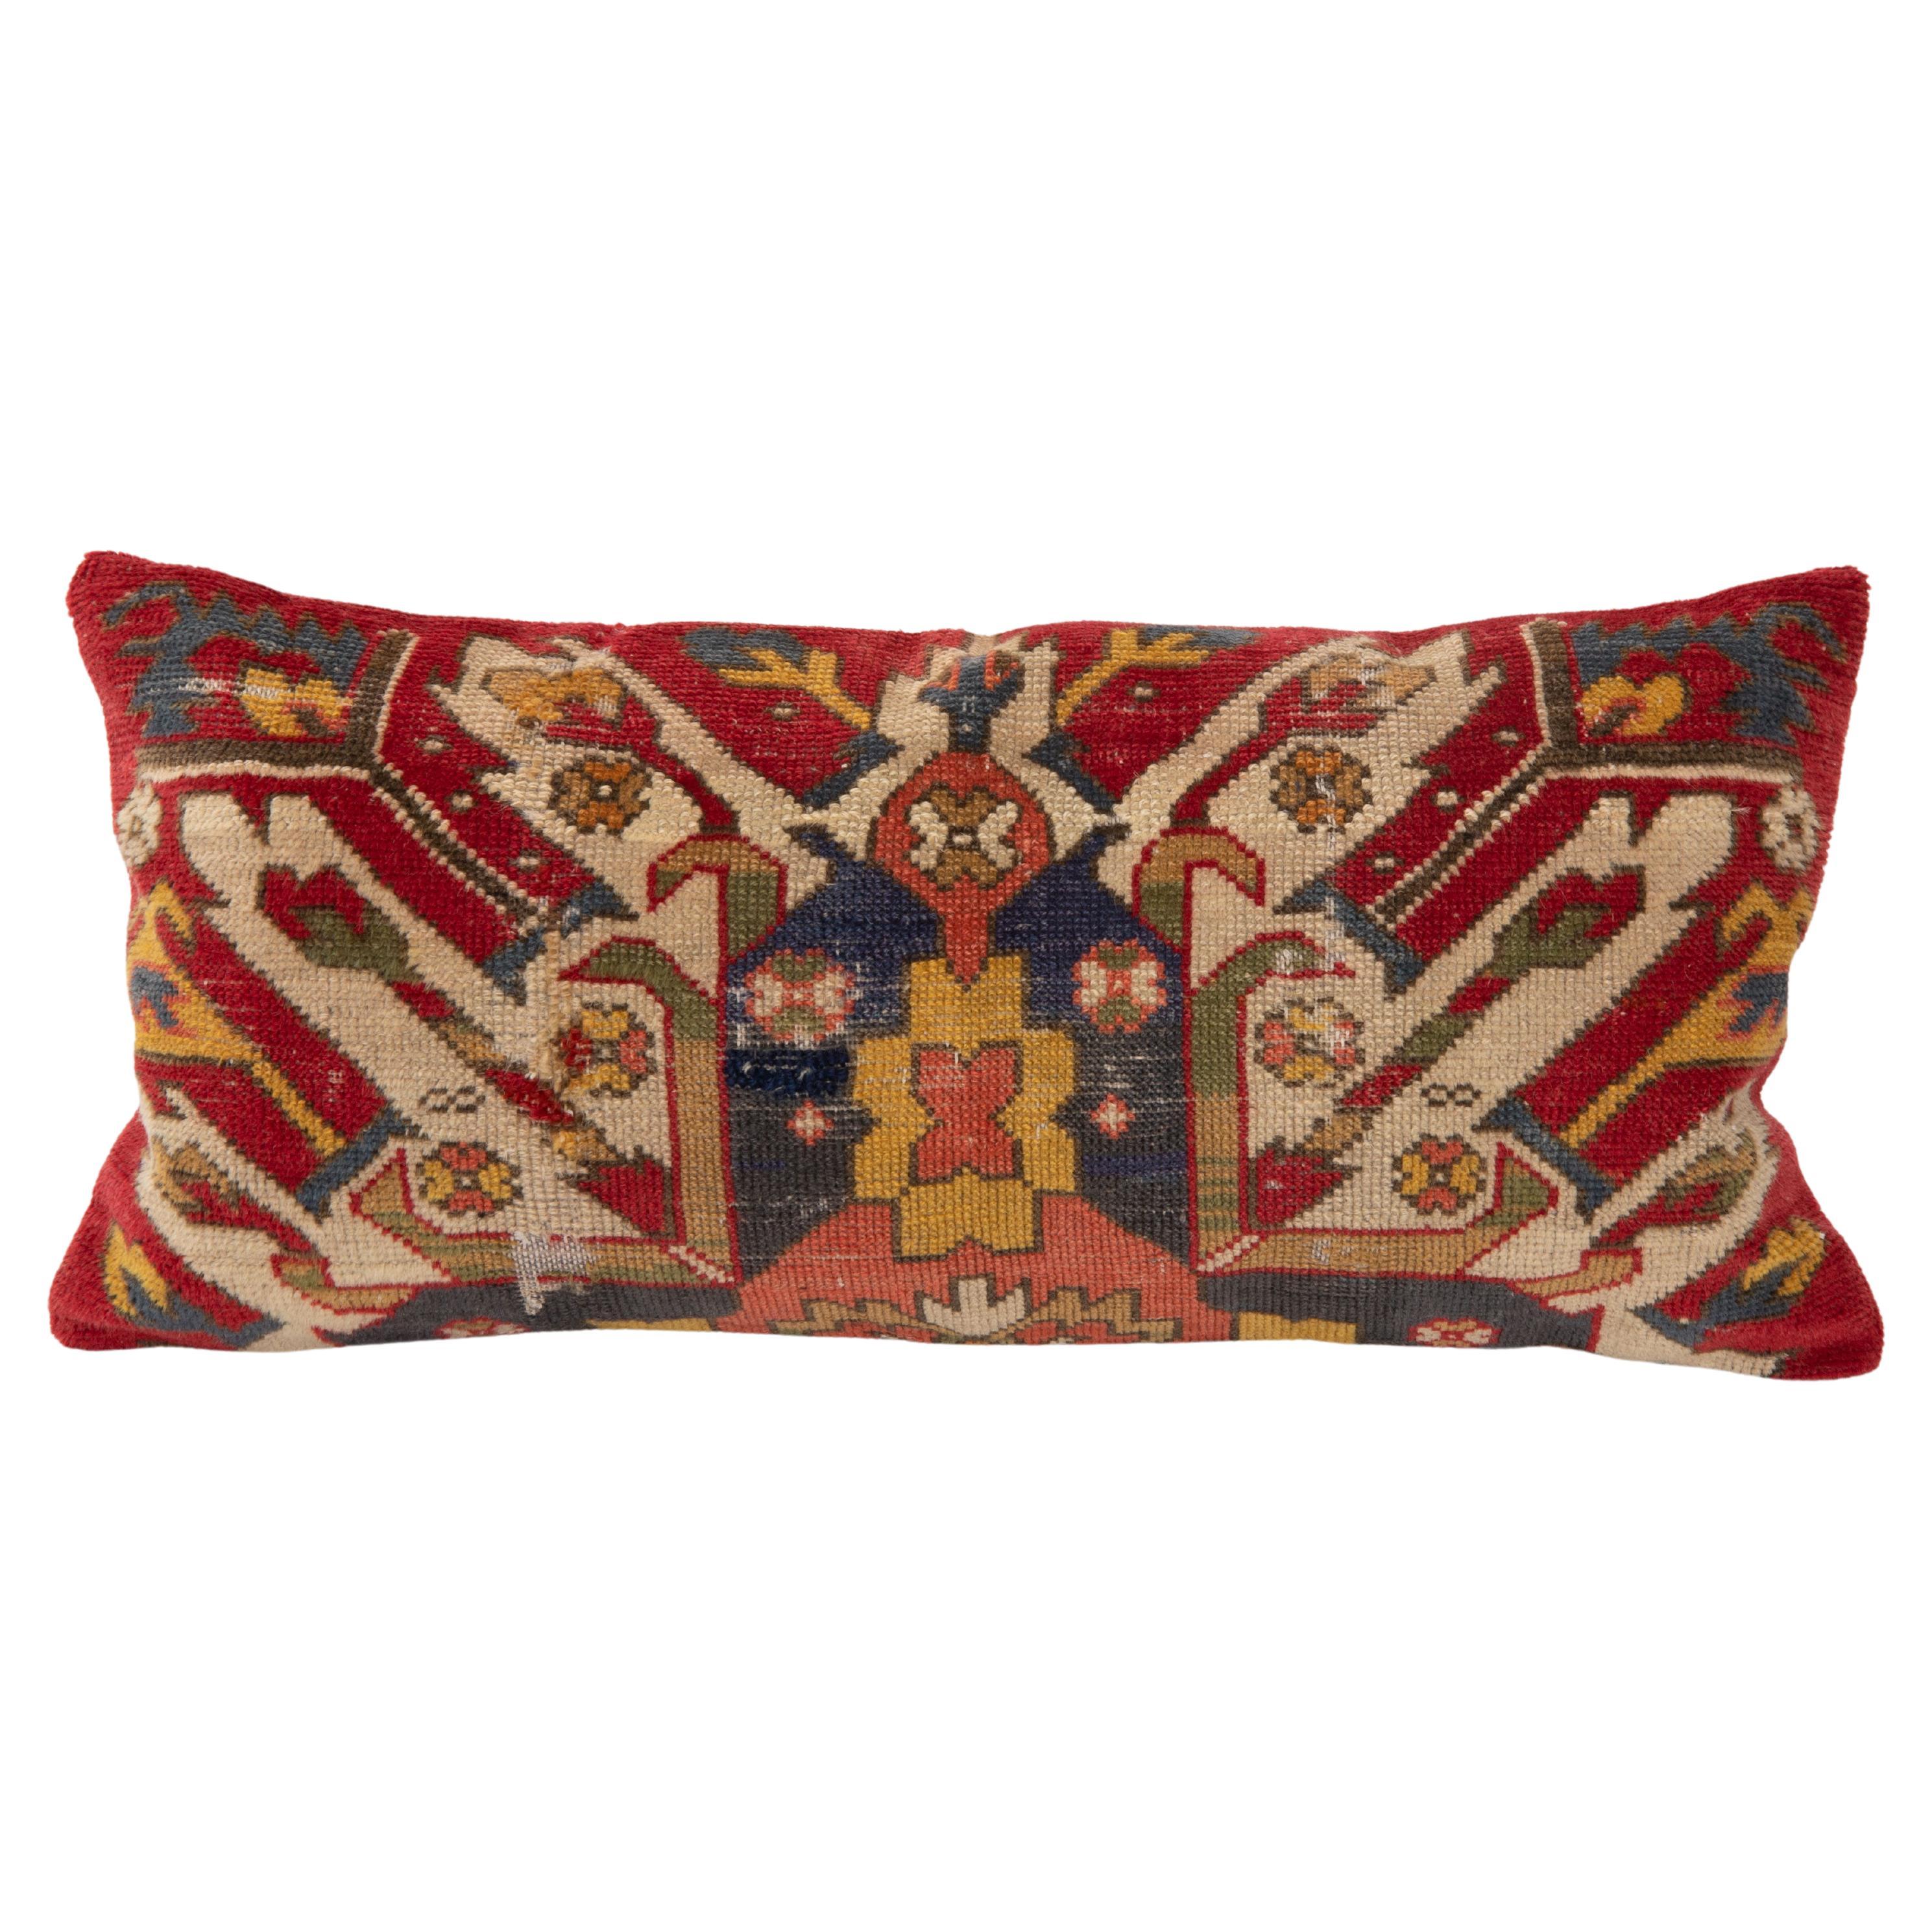 Antique Caucasaian Rug Pillow Cover, Early 20th C